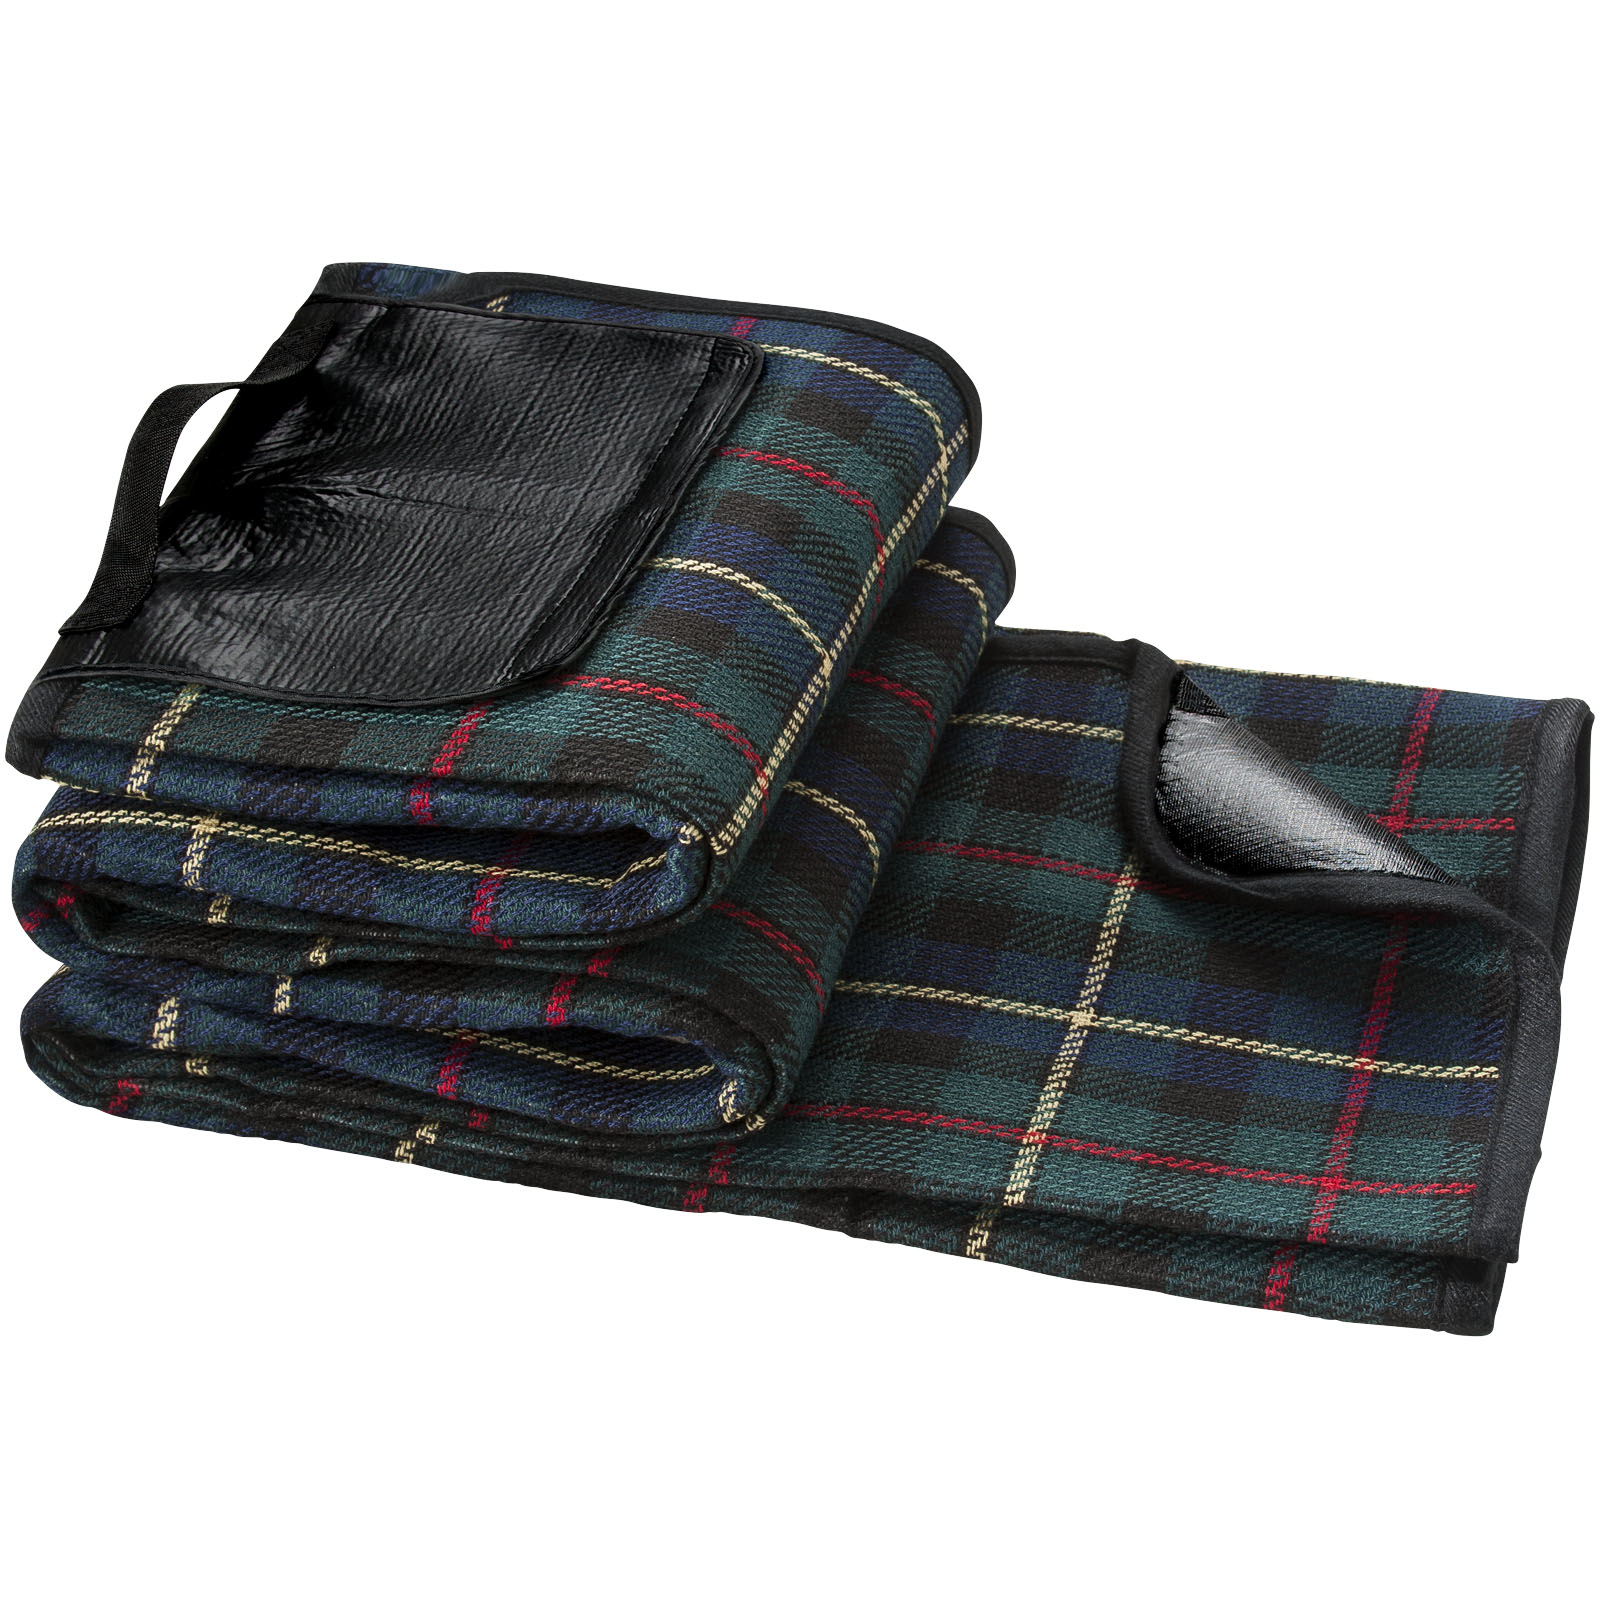 Picnic Accessories - Park water and dirt resistant picnic blanket